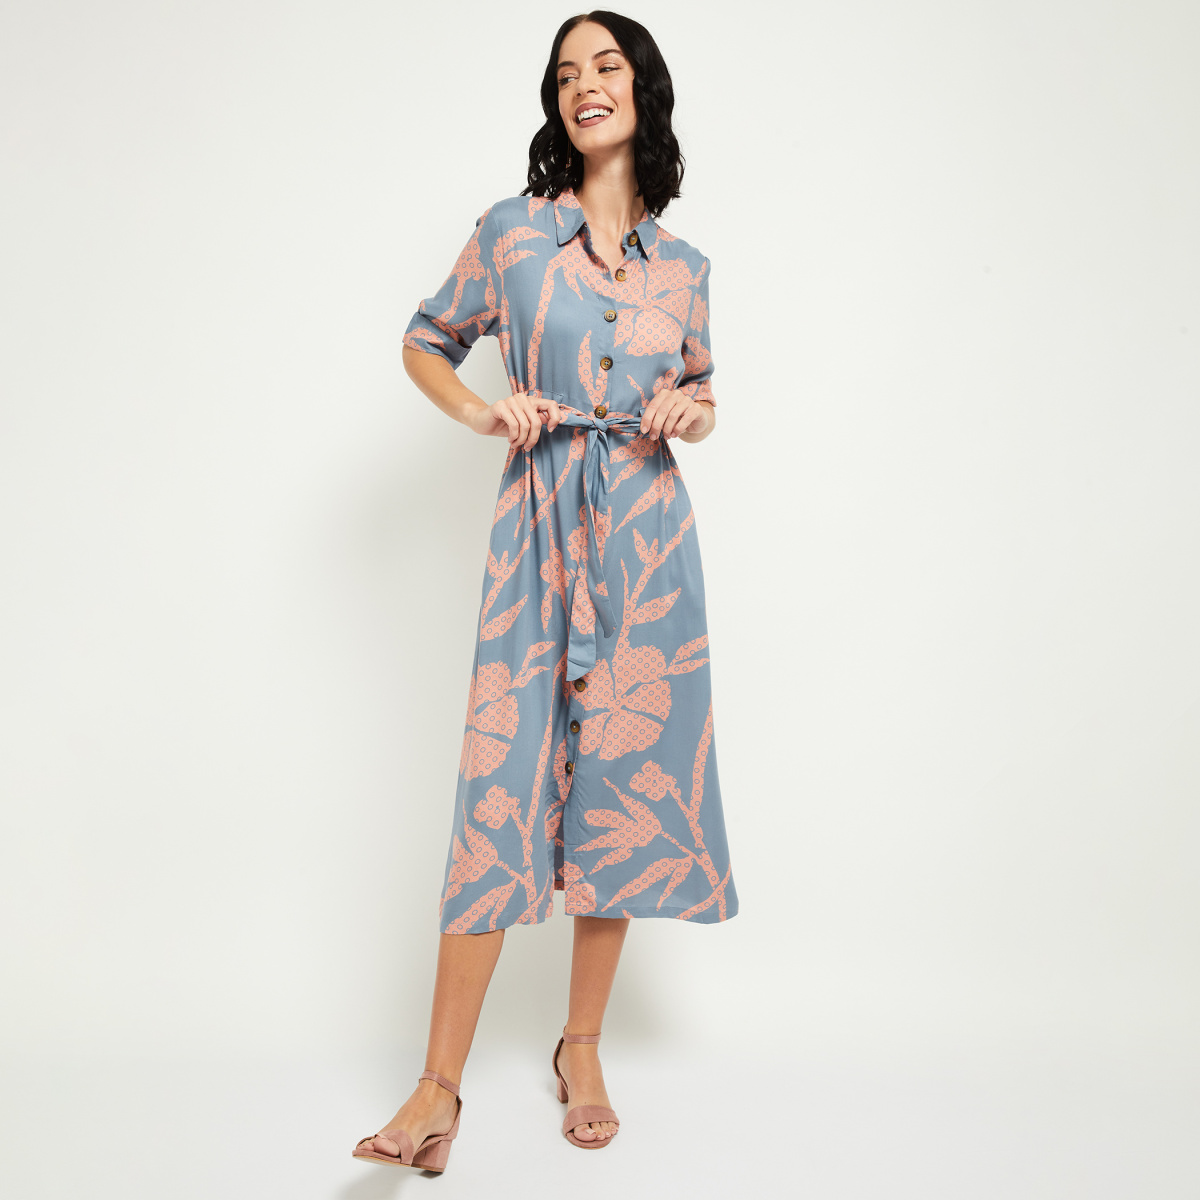 MAX Floral Print Shirt Dress with Sash Tie-Up